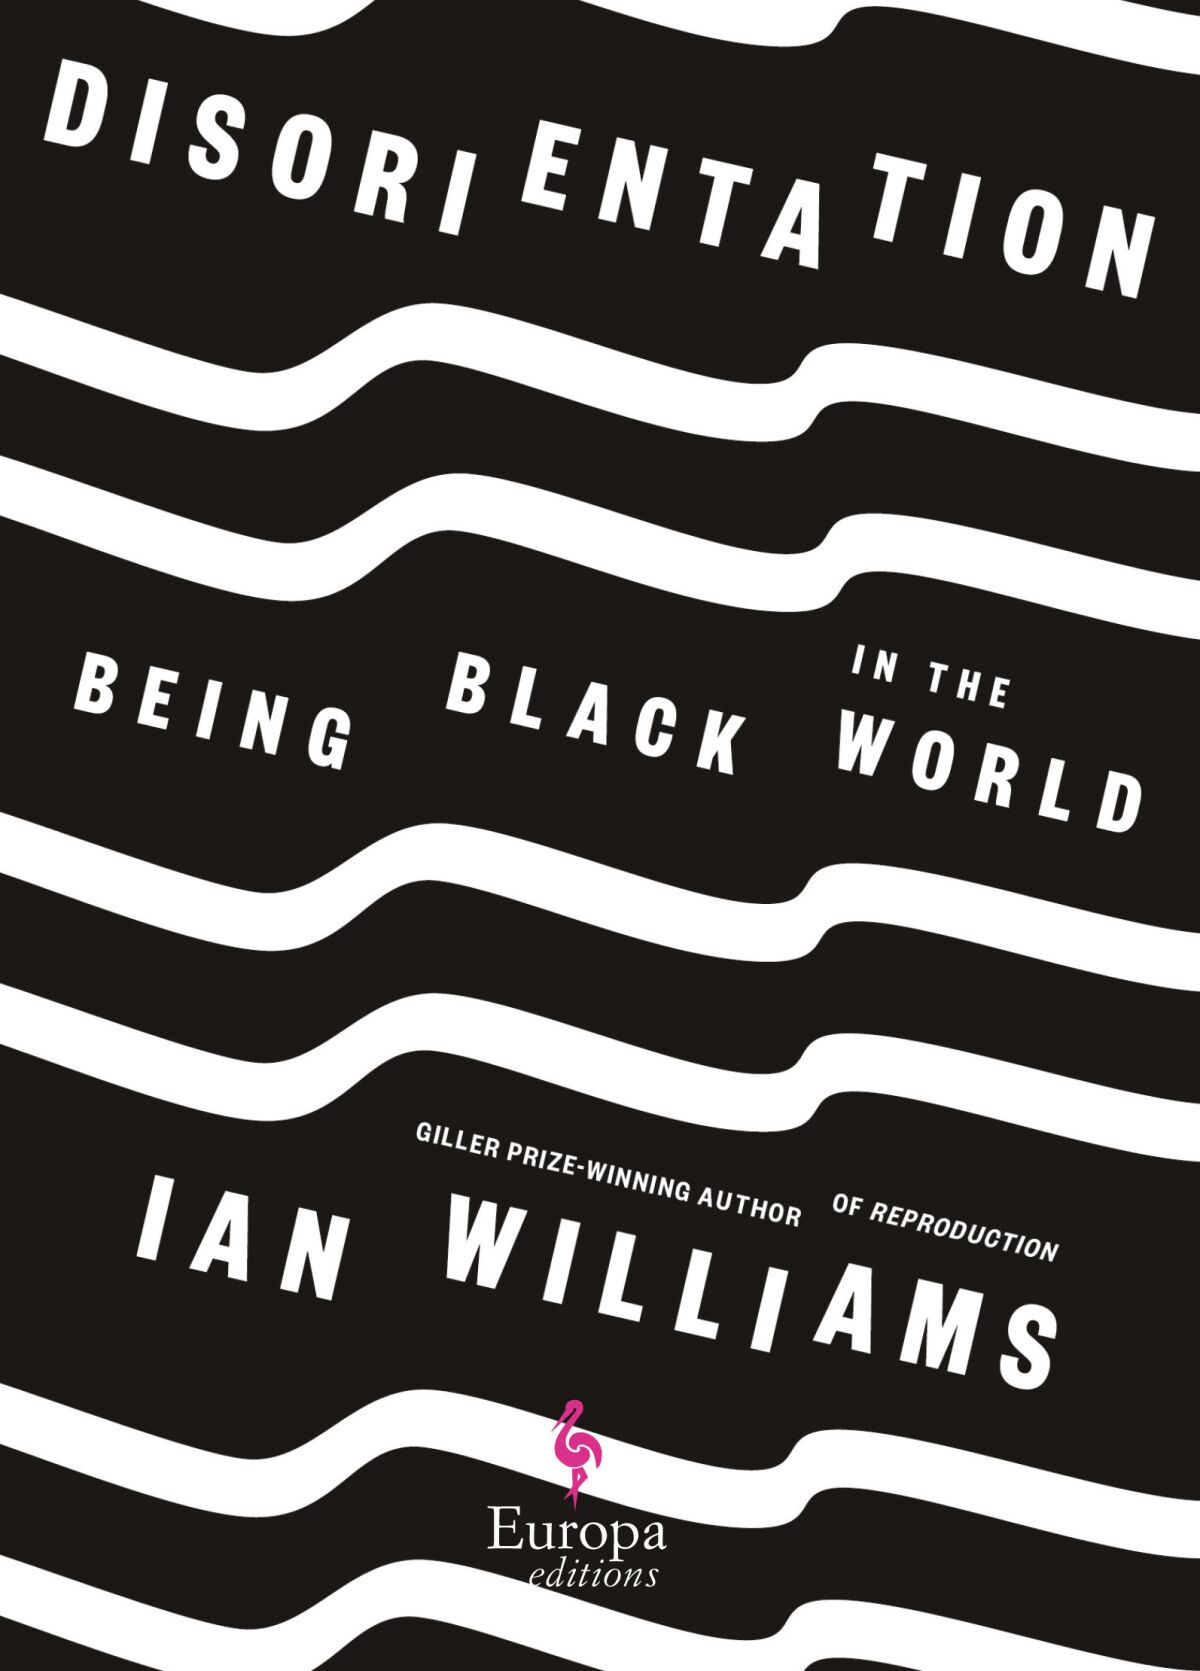 "Disorientation: Being Black in the World," by Ian Williams